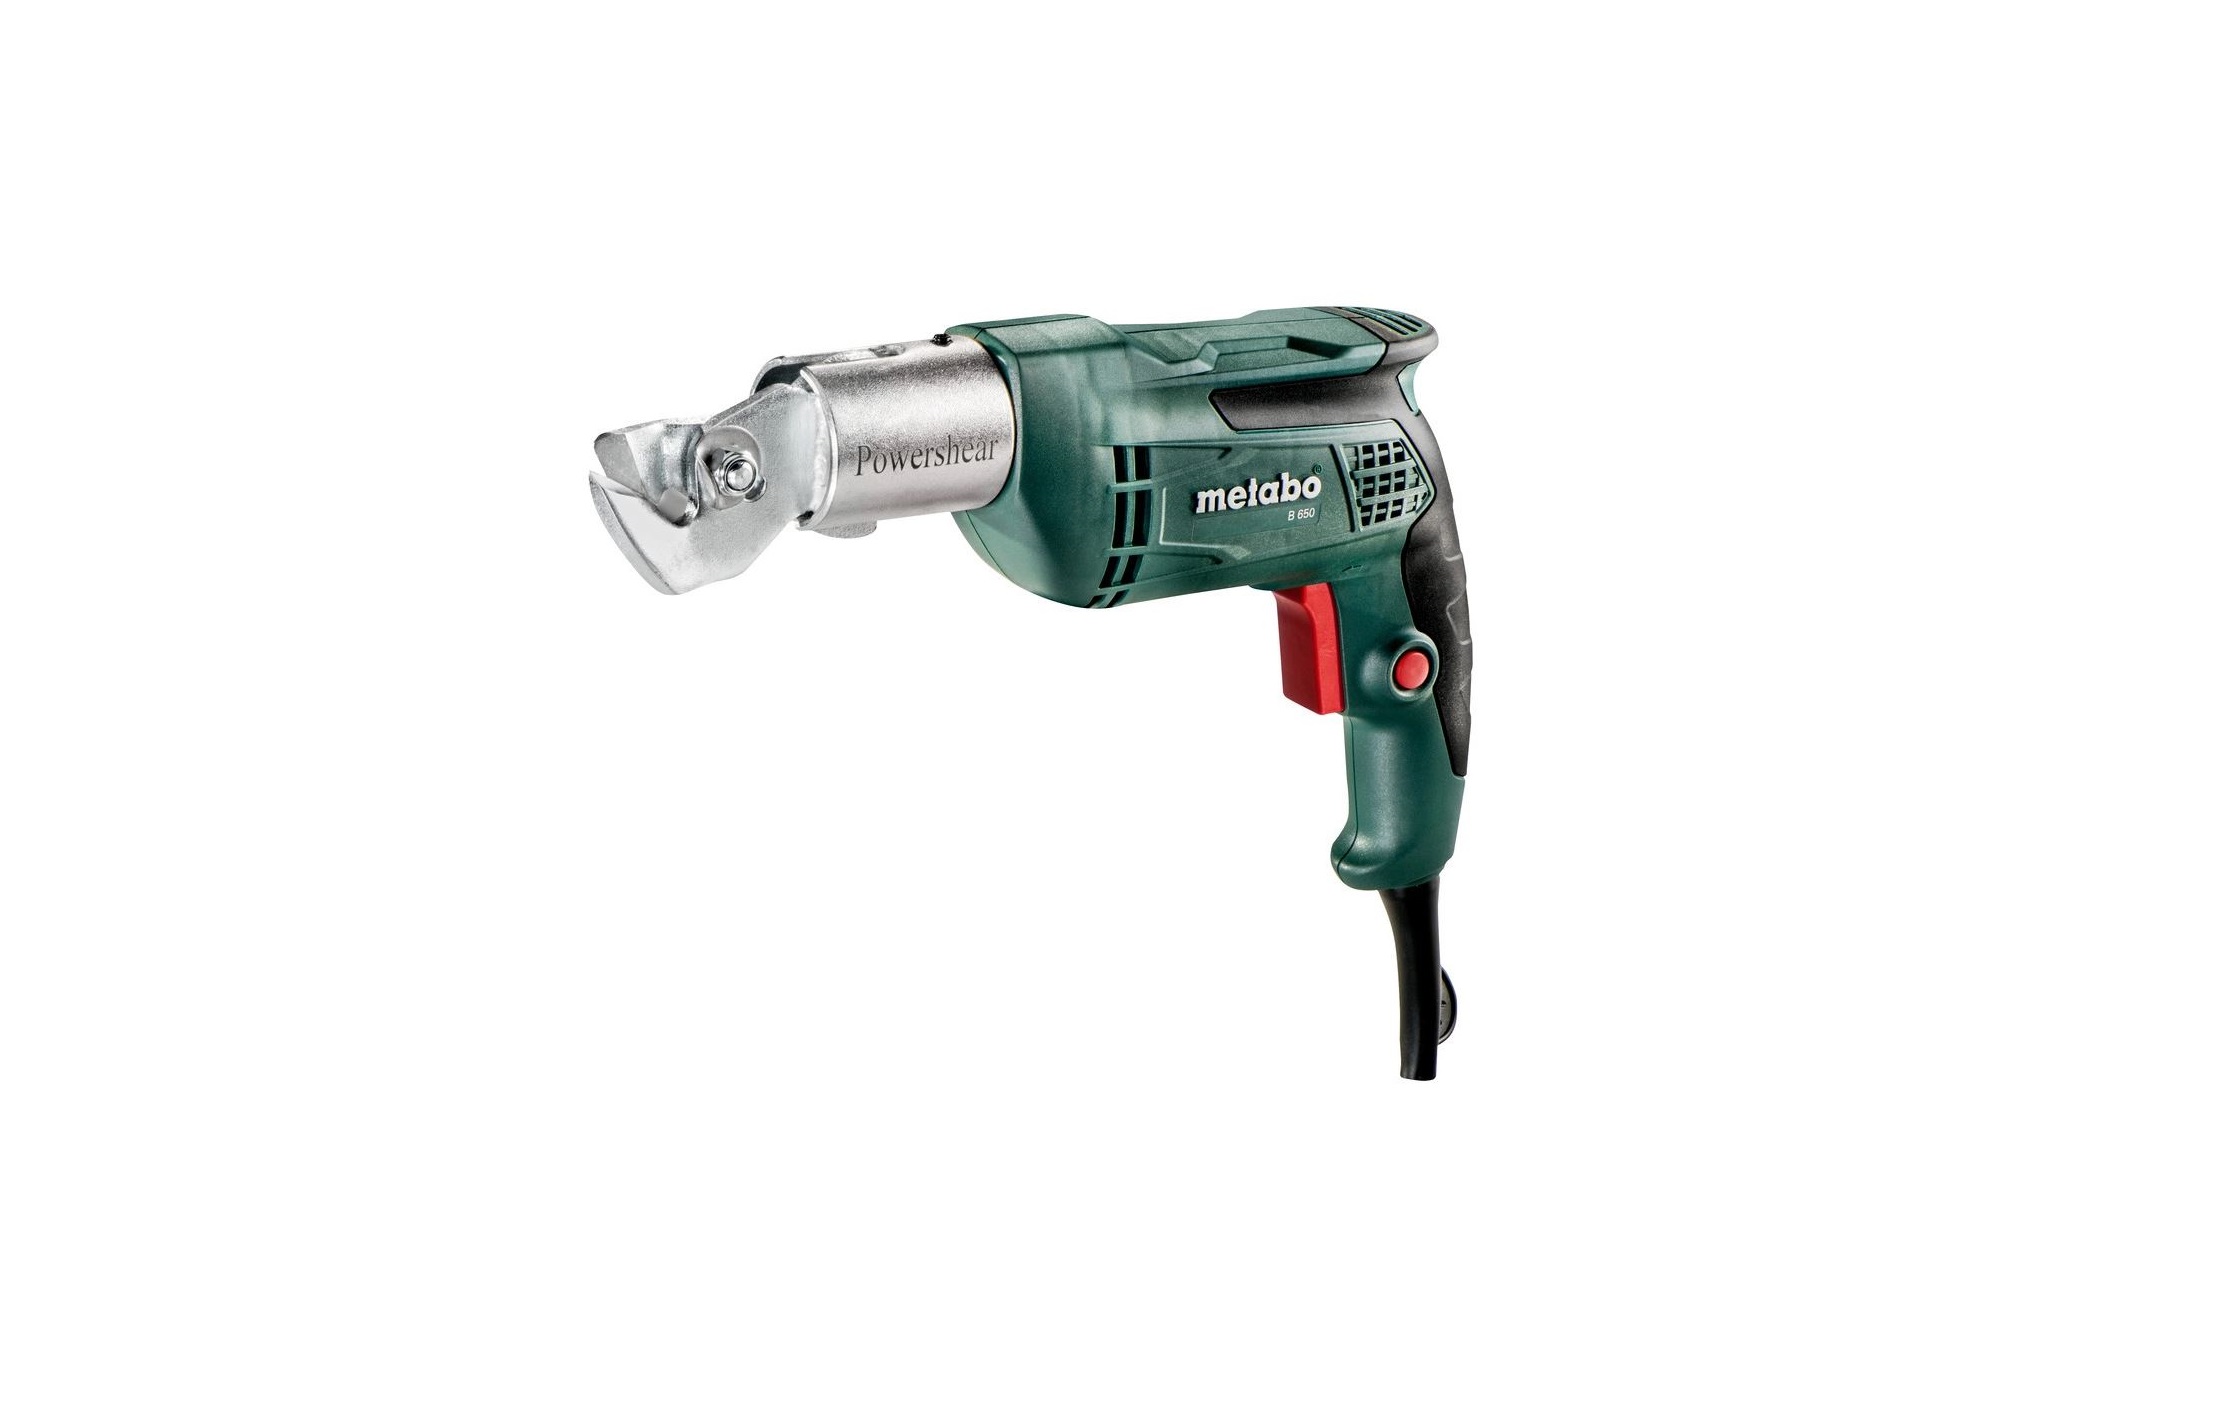 metabo B 650 650W Metal Power Shear Instructions - Featured image